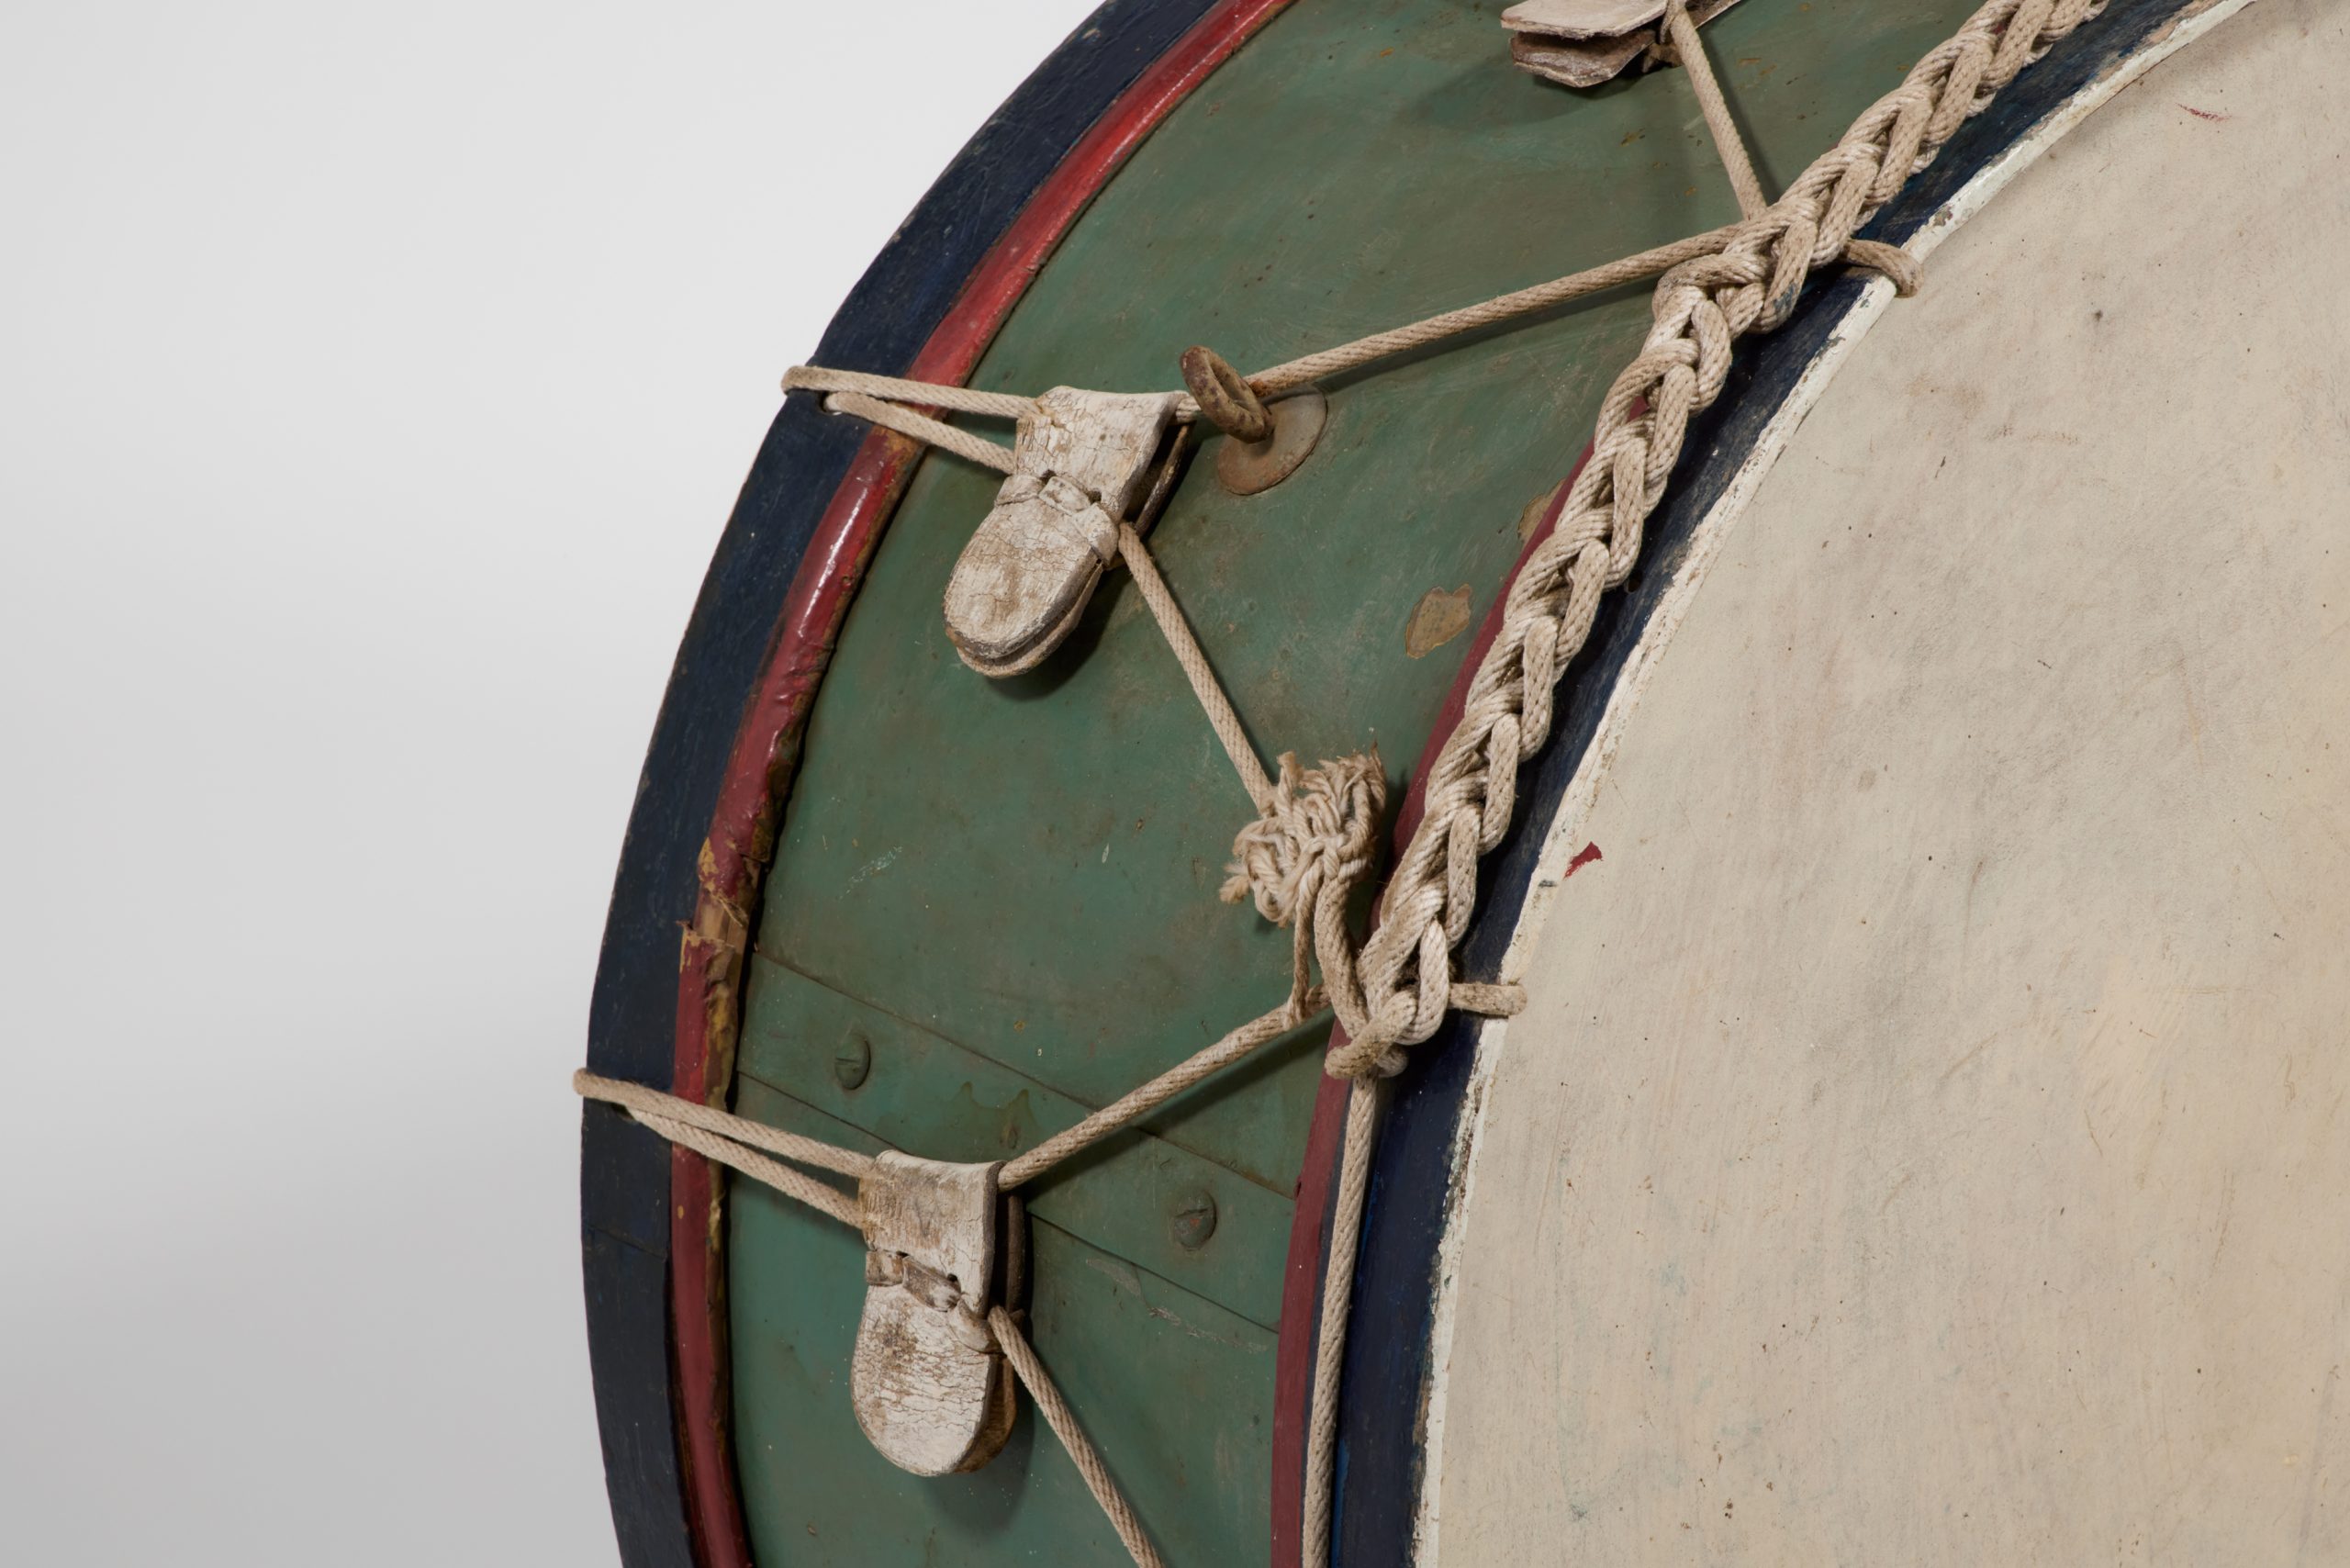 Detail shot of corded side of a green bass drum